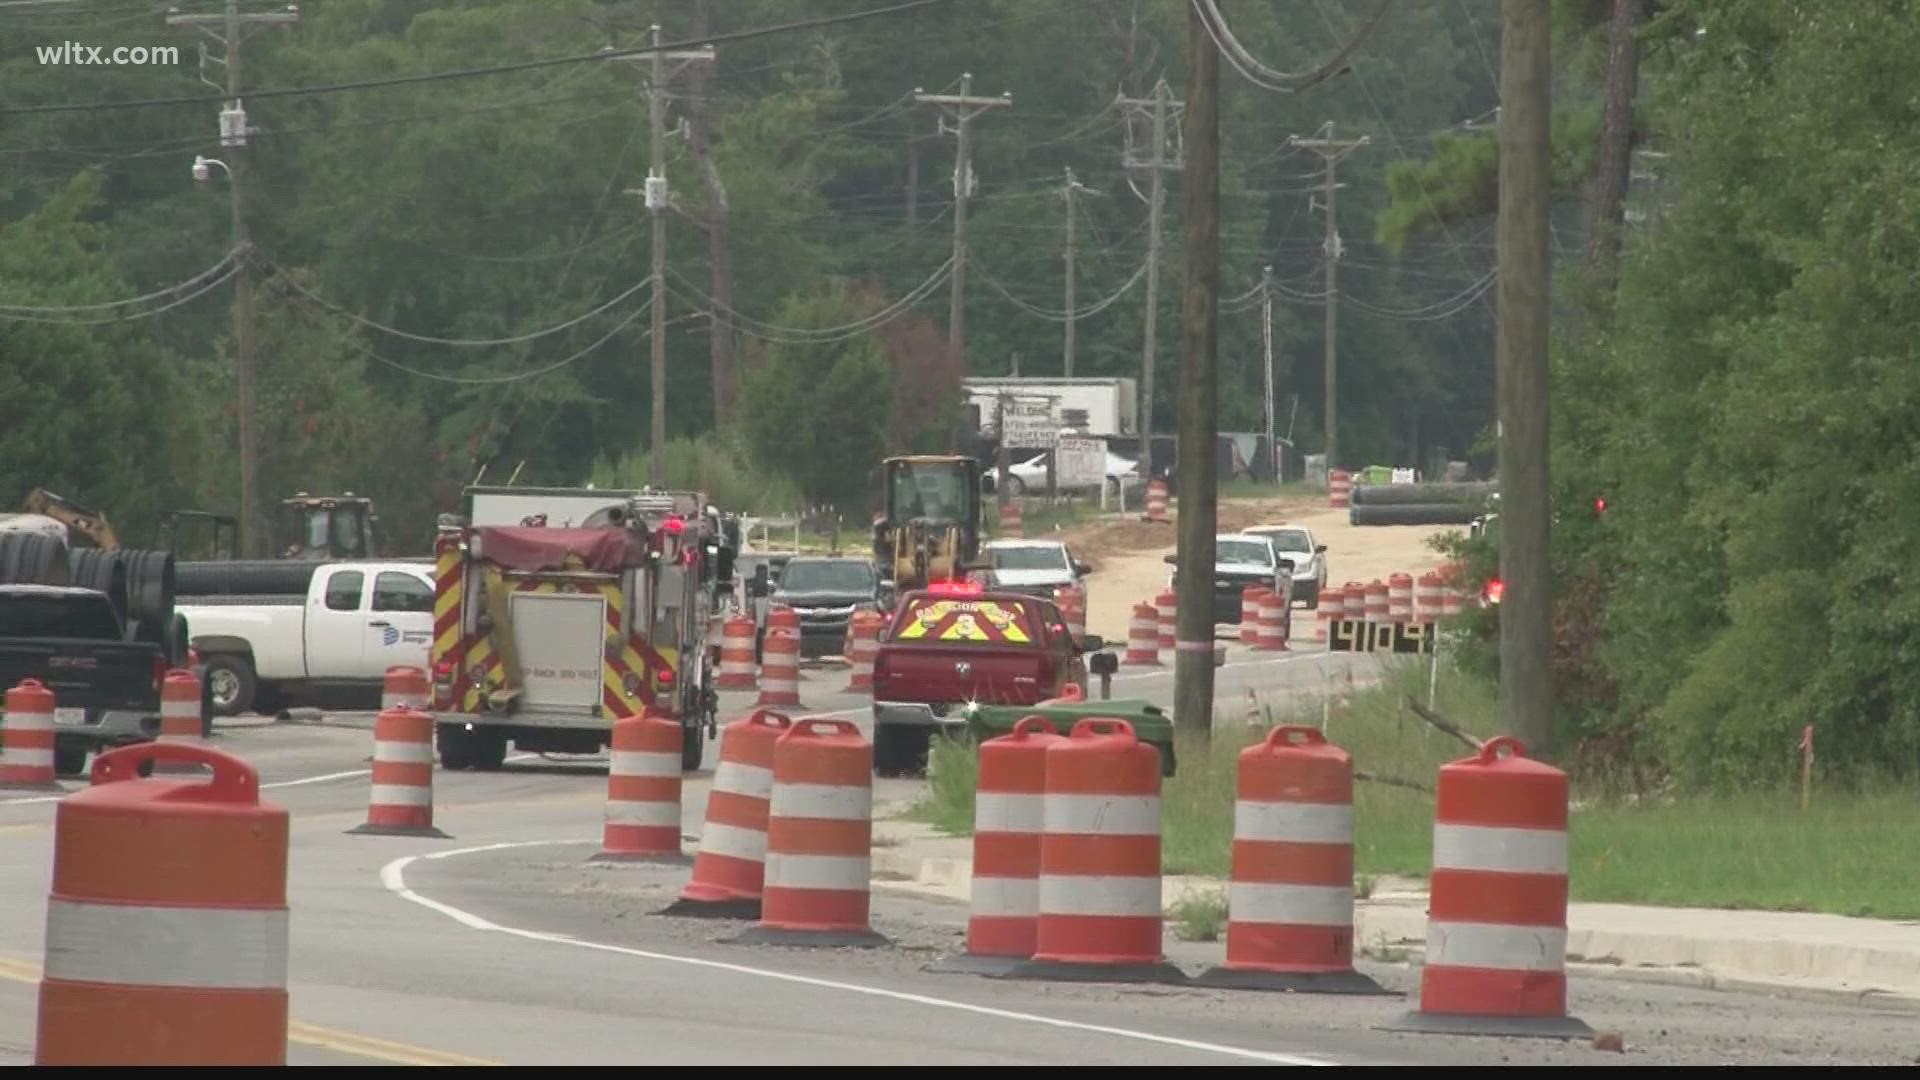 A natural gas line has been cut on Hardscrabble Road, closing a portion of the road between Clemson and North Brickyard Roads in northeast Richland County.